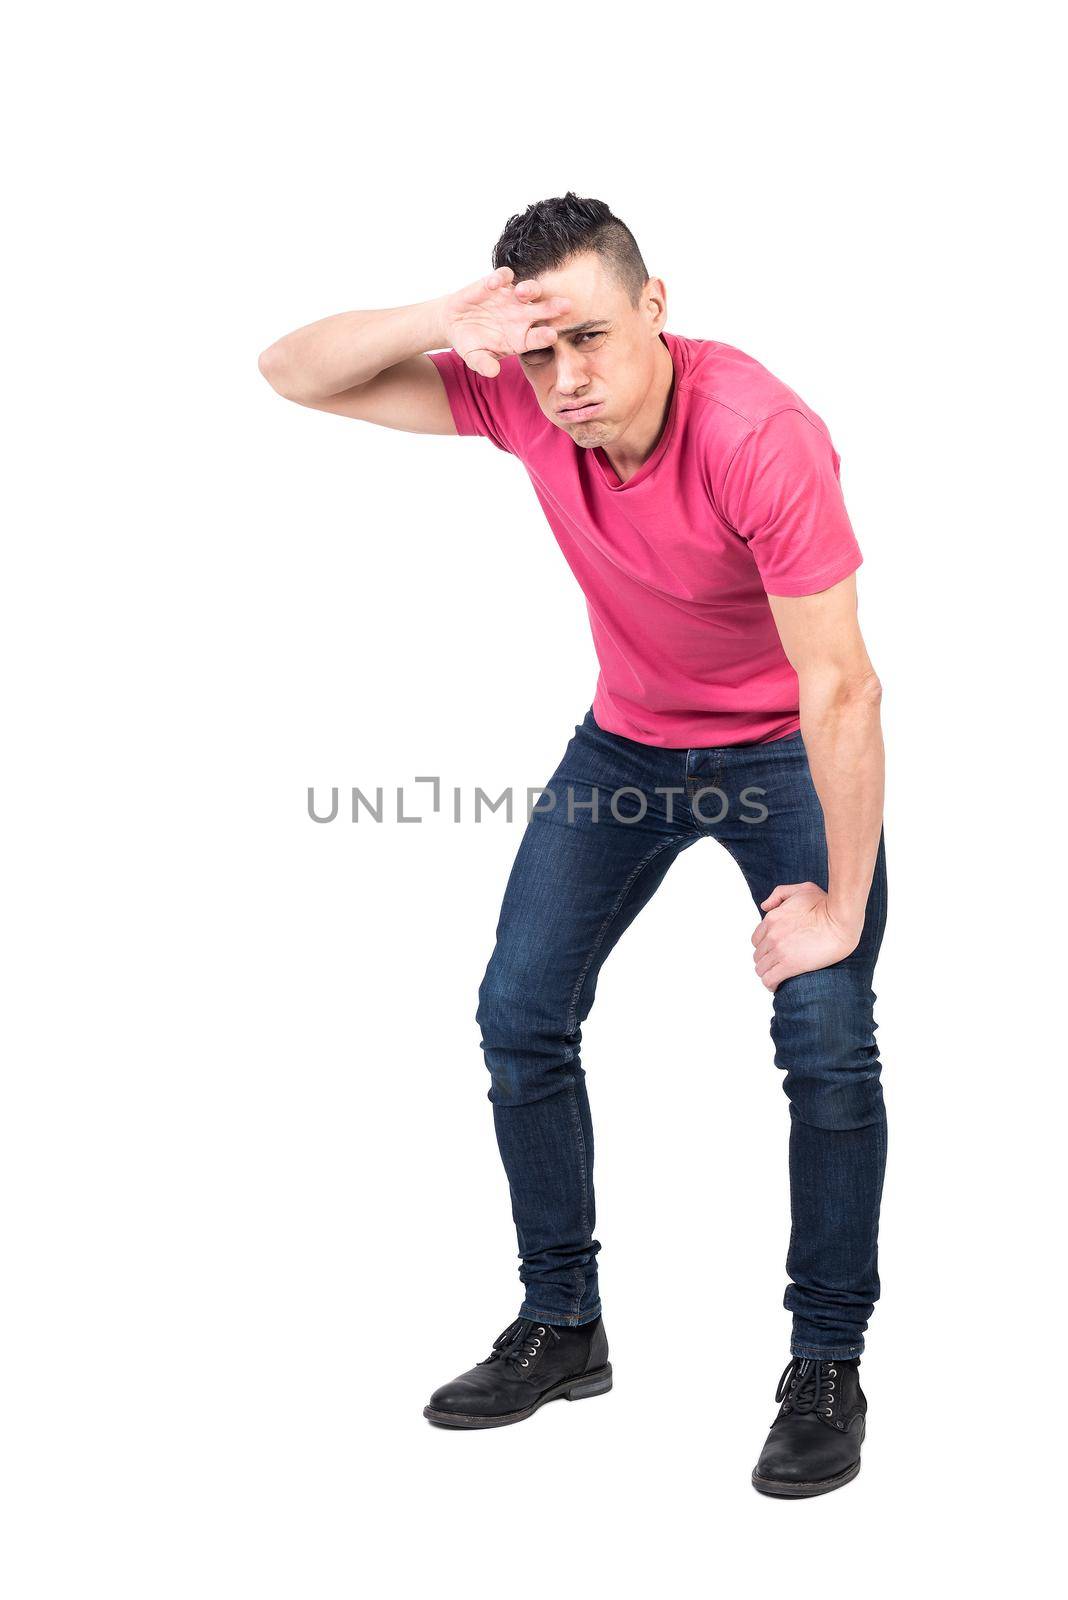 Full length weary man panting and wiping sweat from forehead while leaning on knee an looking at camera against white background